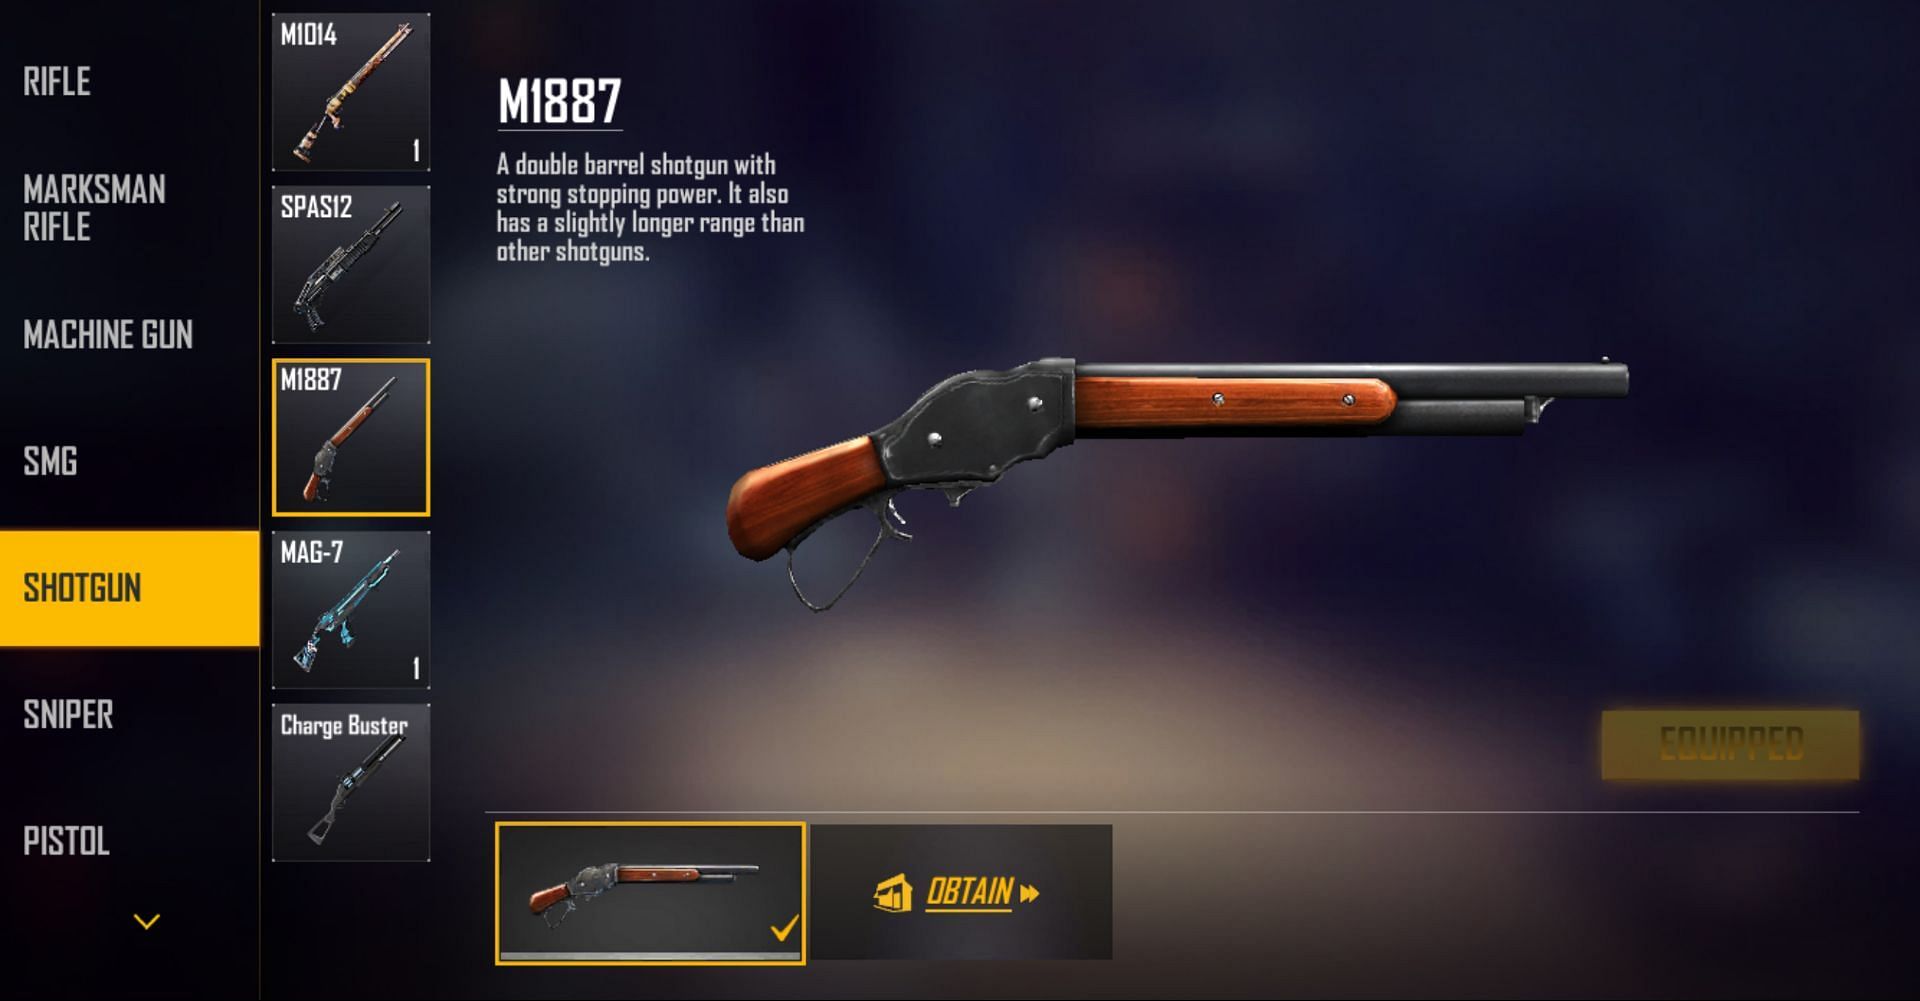 M1887 has the highest damage in the game (Image via Garena)